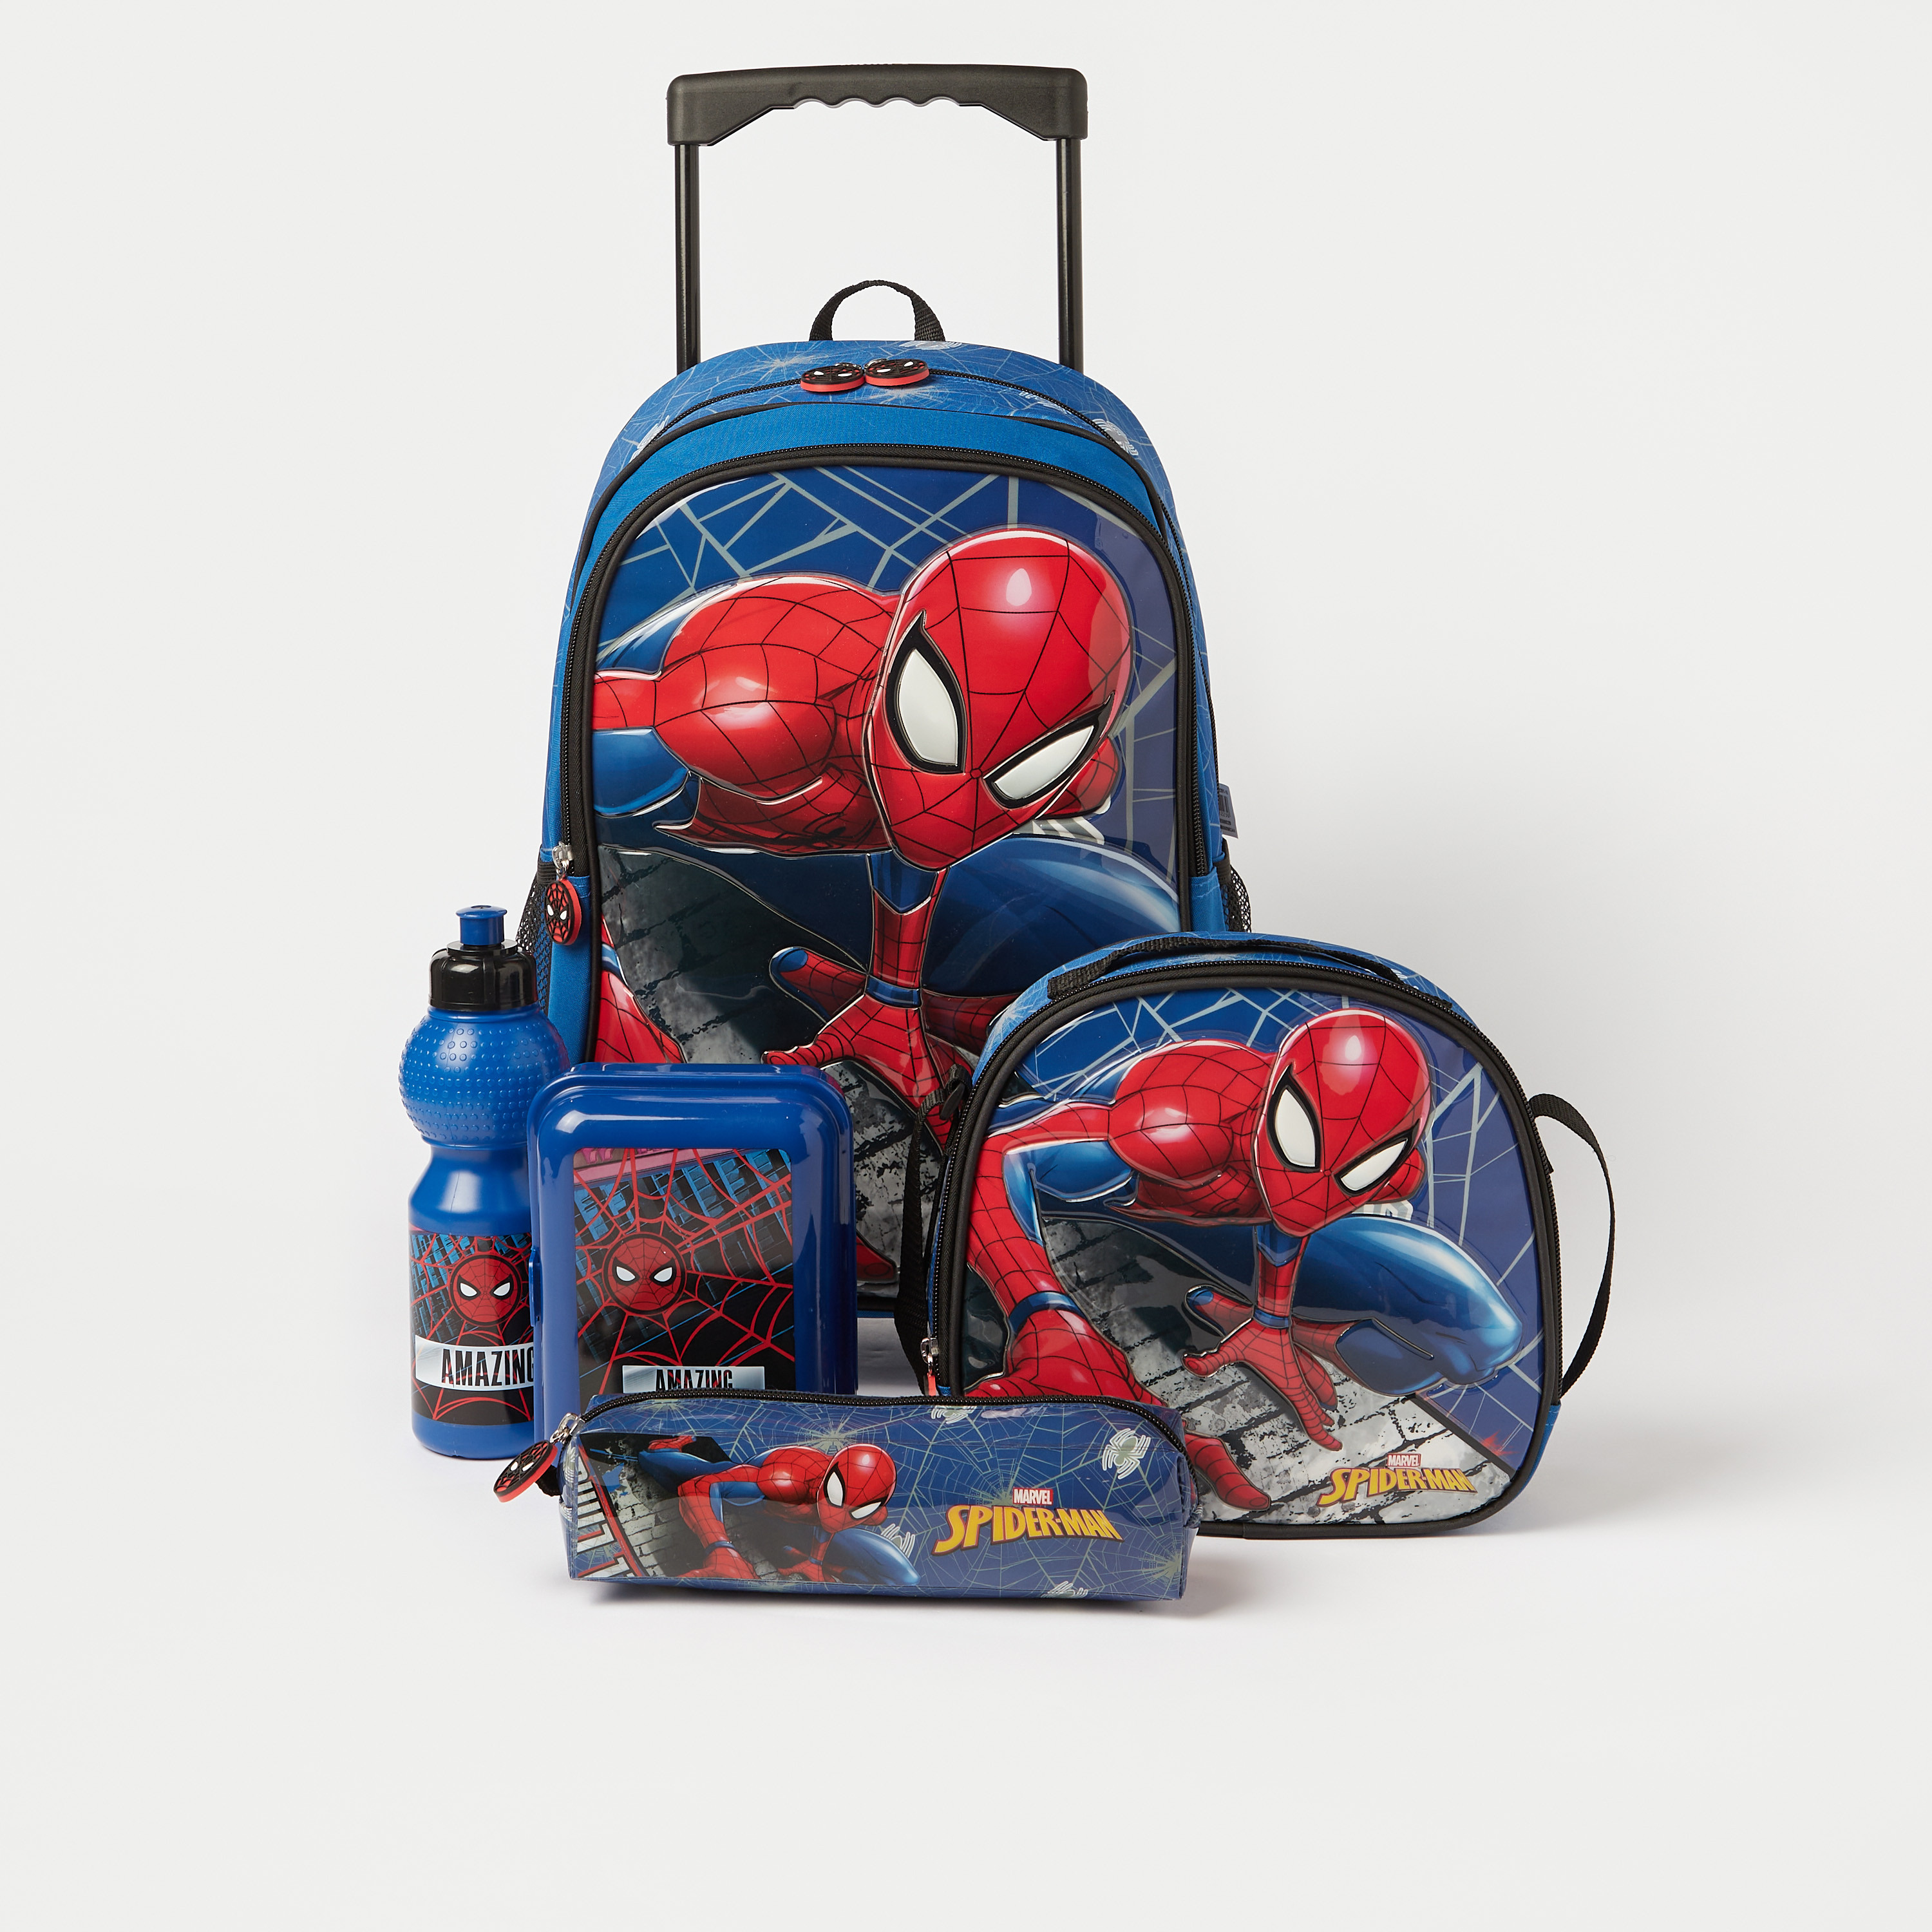 Buy Spiderman Boys 16 Inch Backpack With Removable Matching Lunch Box Set  (Red-Blue) at Amazon.in